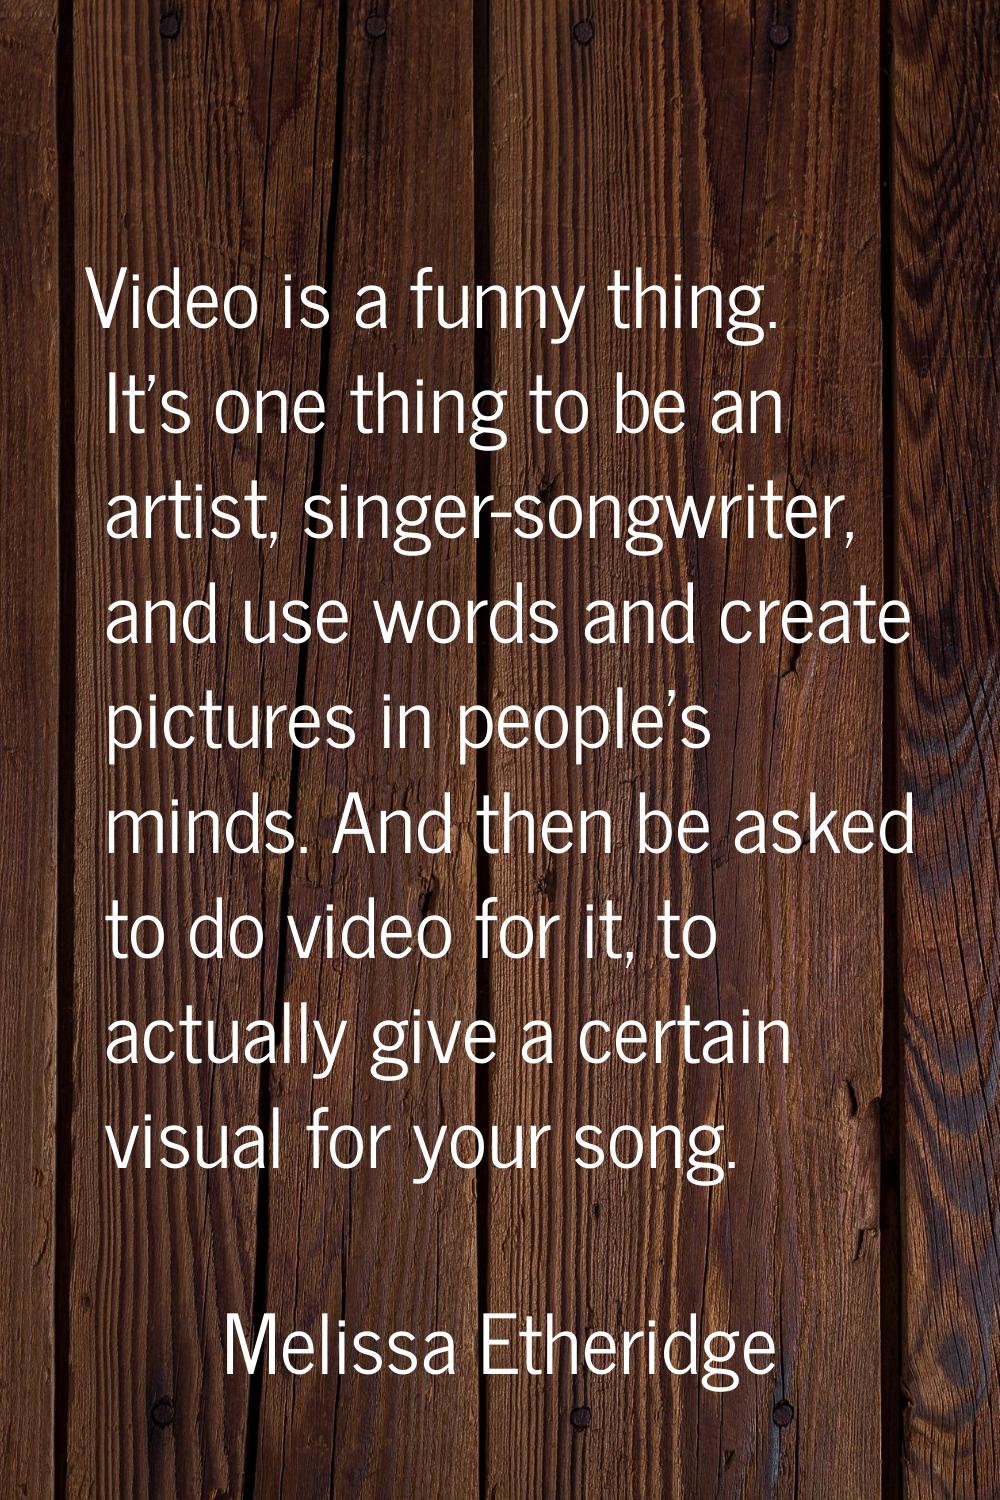 Video is a funny thing. It's one thing to be an artist, singer-songwriter, and use words and create